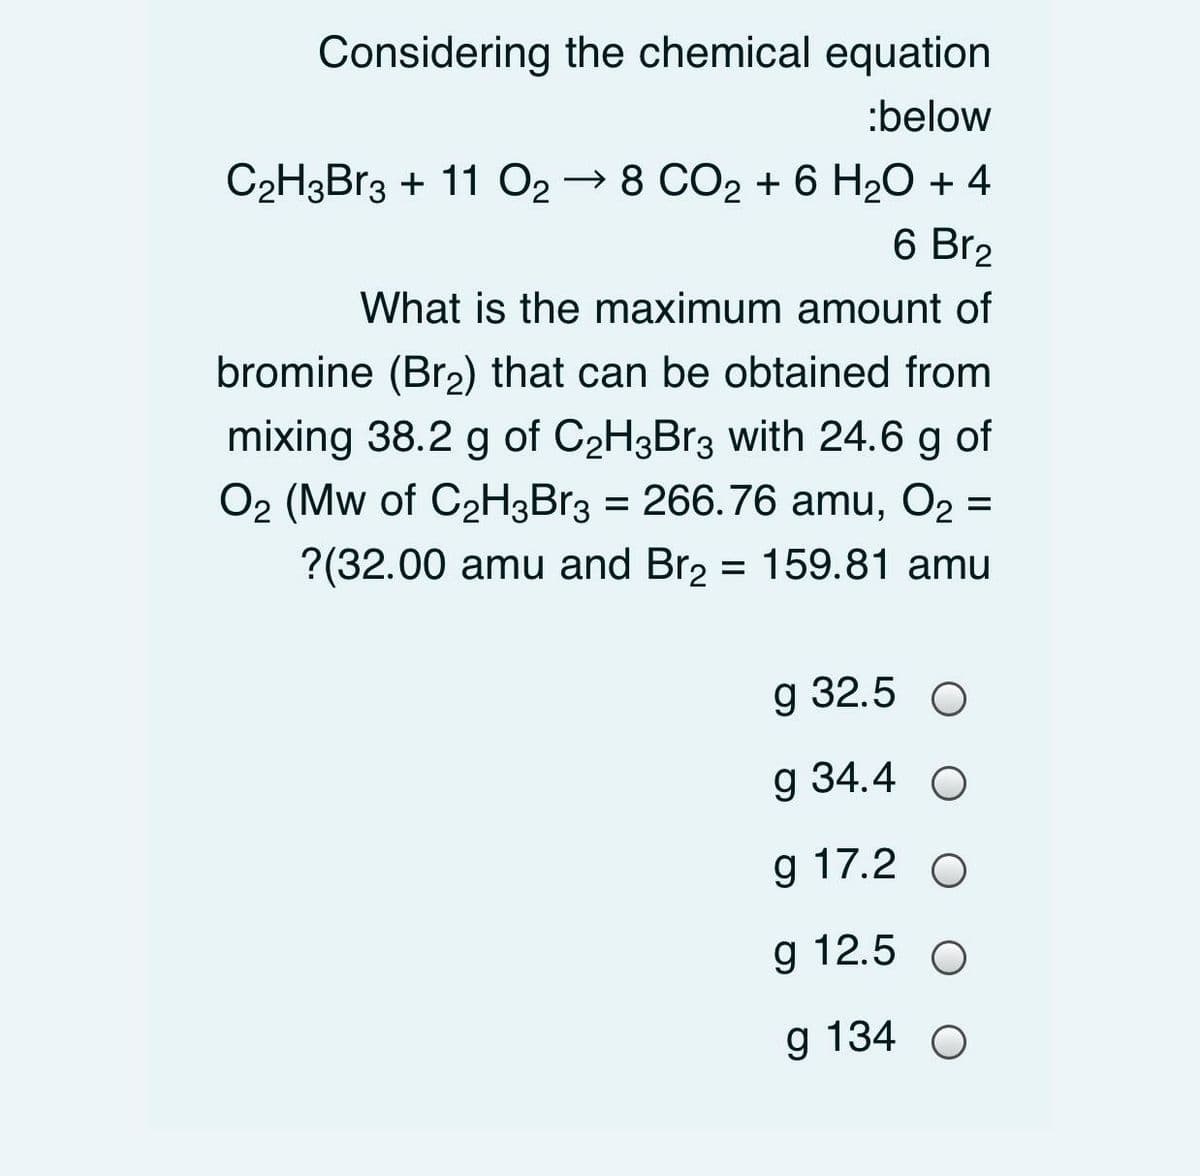 Considering the chemical equation
:below
C2H3Br3 + 11 O2 → 8 CO2 + 6 H20 + 4
6 Br2
What is the maximum amount of
bromine (Br2) that can be obtained from
mixing 38.2 g of C2H3B13 with 24.6 g of
O2 (Mw of C2H3Br3 = 266.76 amu, O2 =
?(32.00 amu and Br2 = 159.81 amu
g 32.5 O
g 34.4 O
g 17.2 О
g 12.5 O
g 134 О
